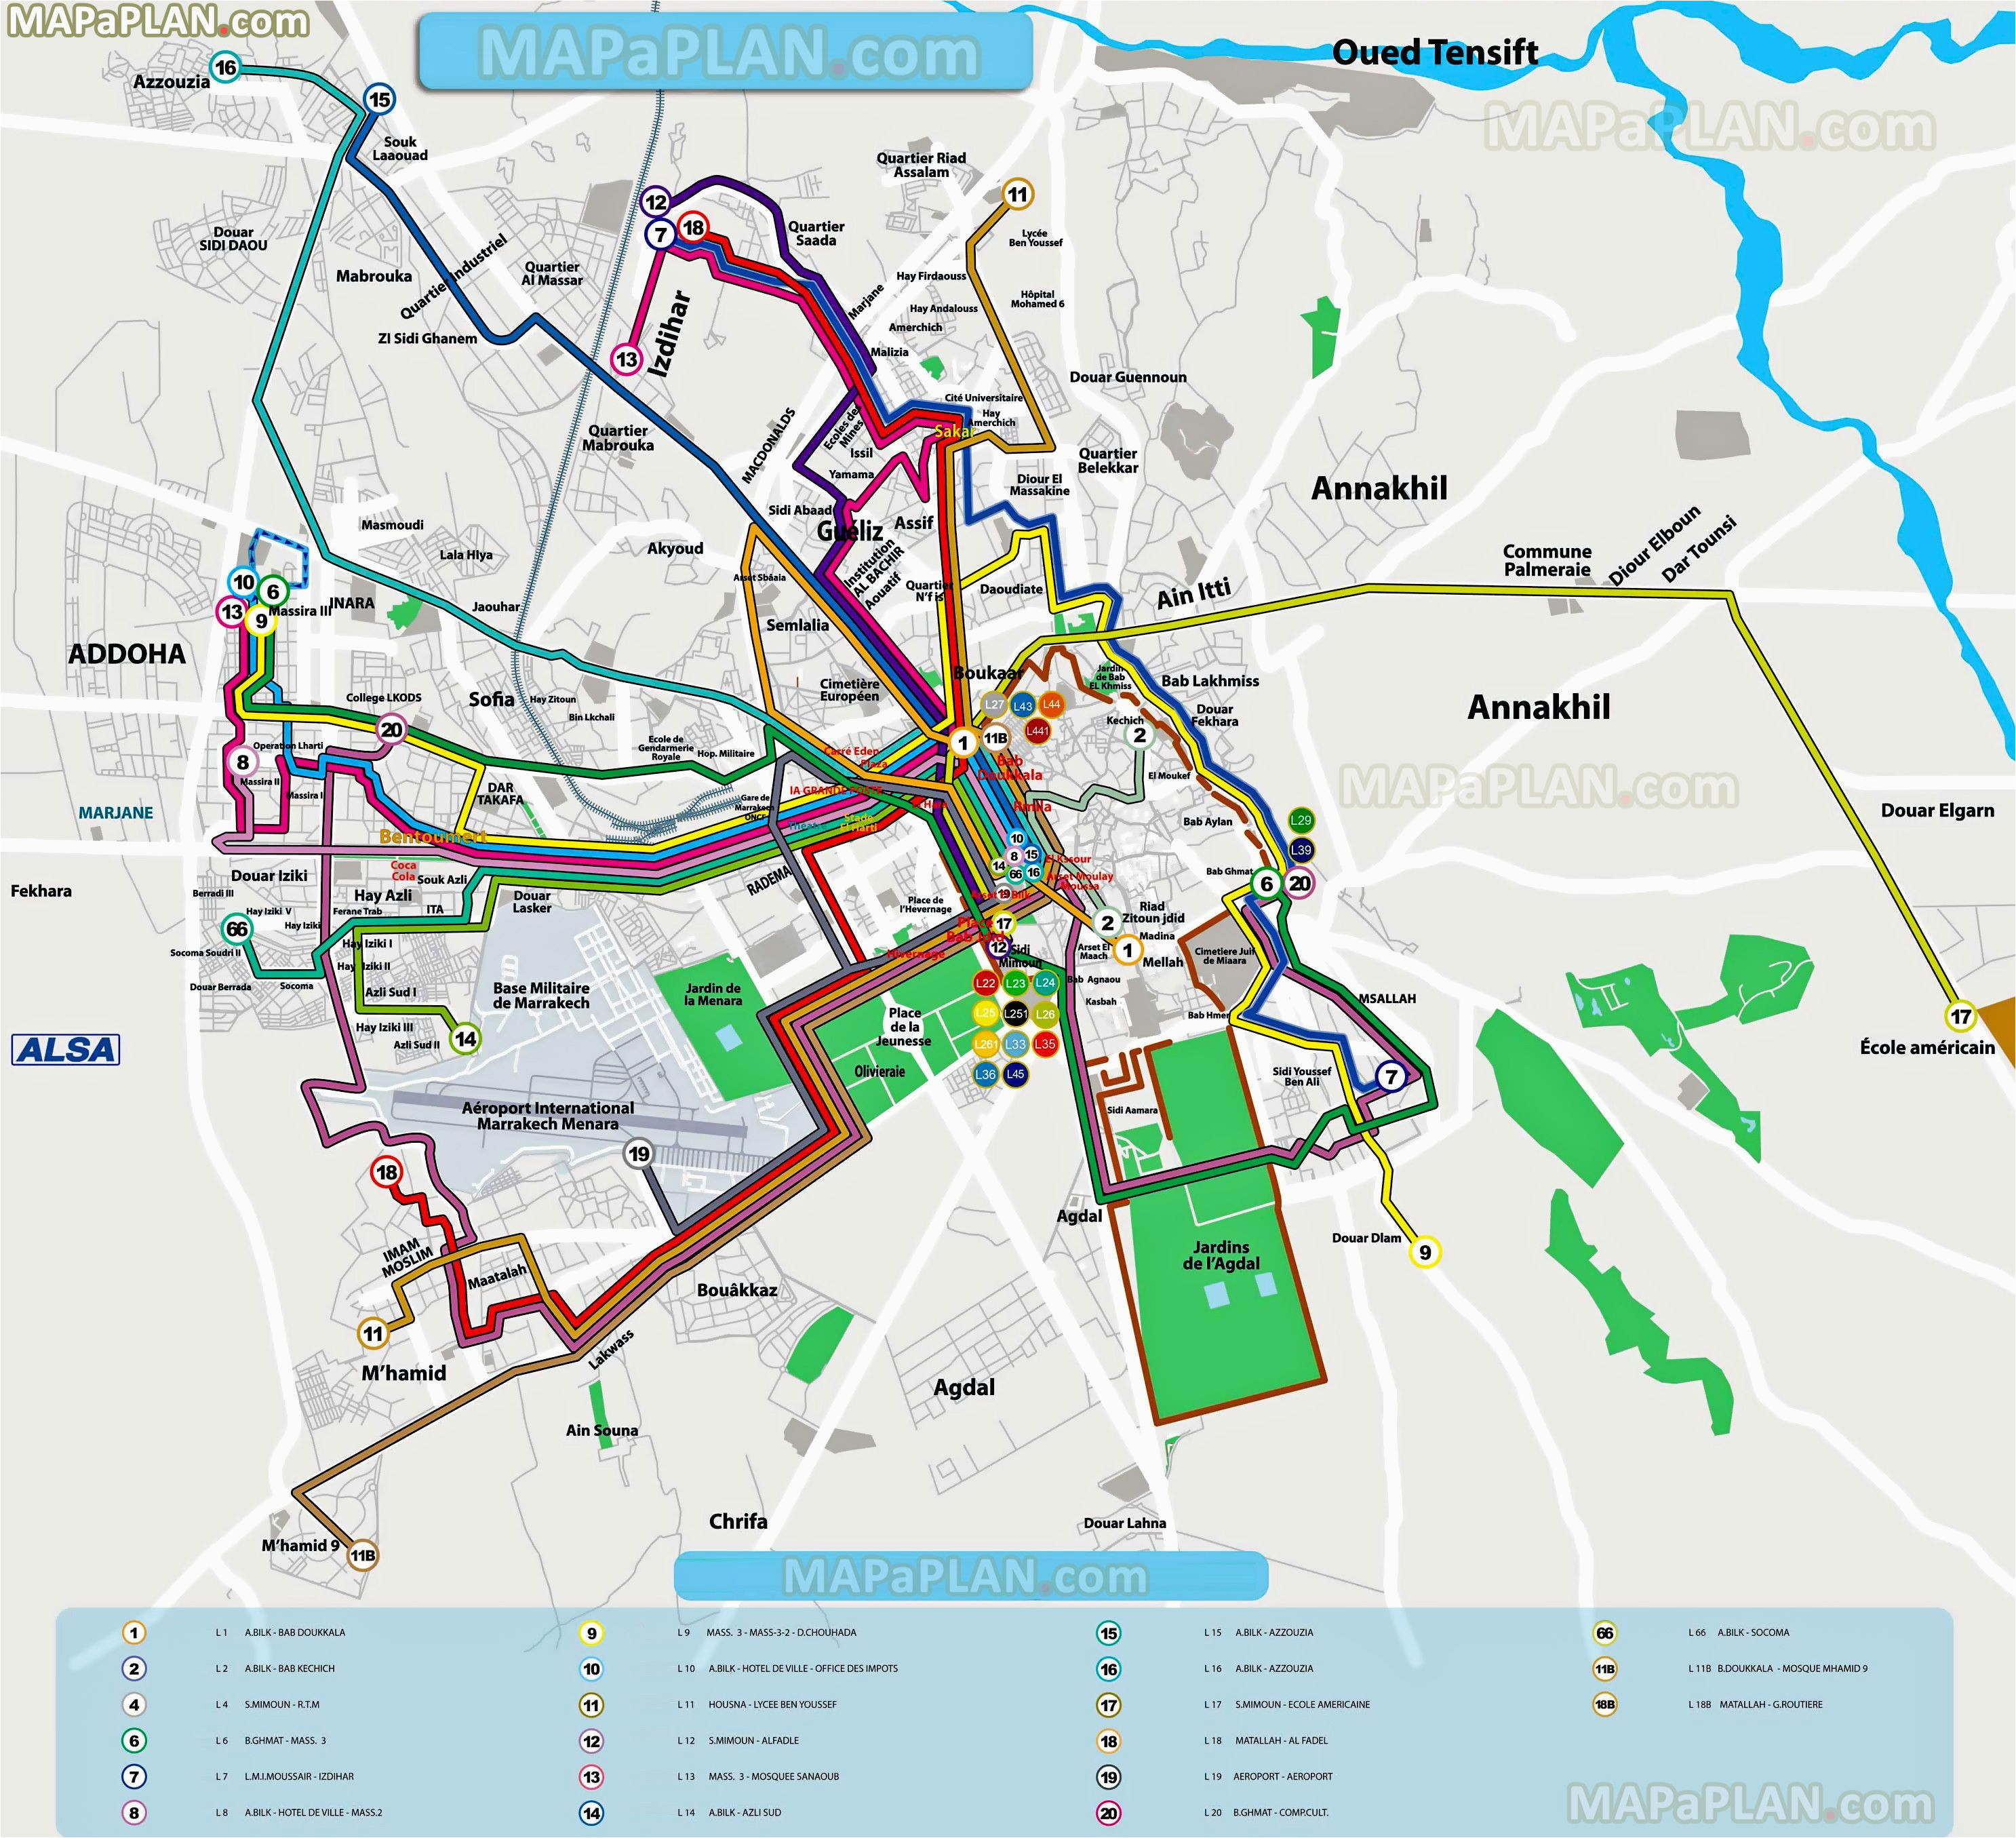 local bus routes lines stops public transport alsa network system